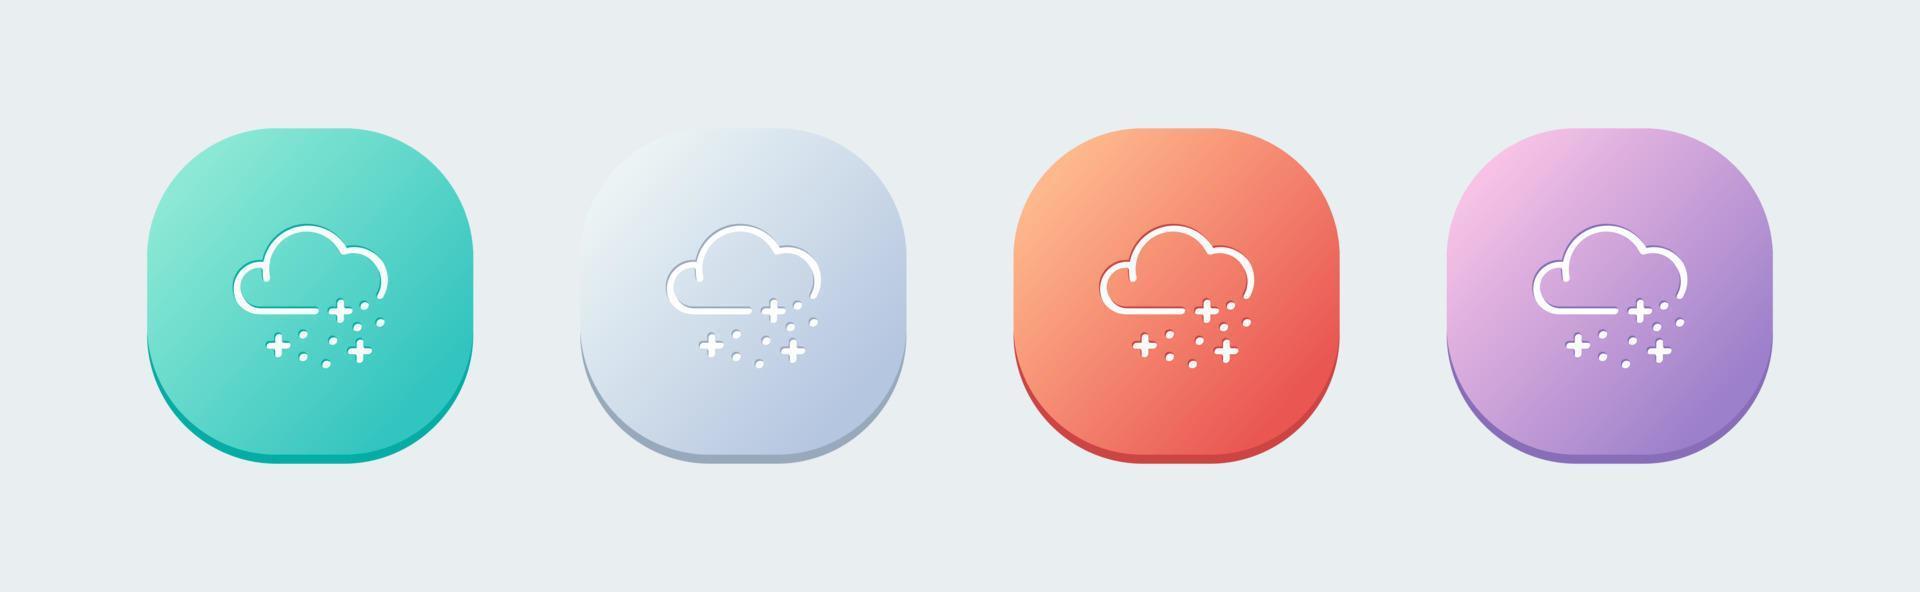 Snowy line icon in flat design style. Weather signs vector illustration.